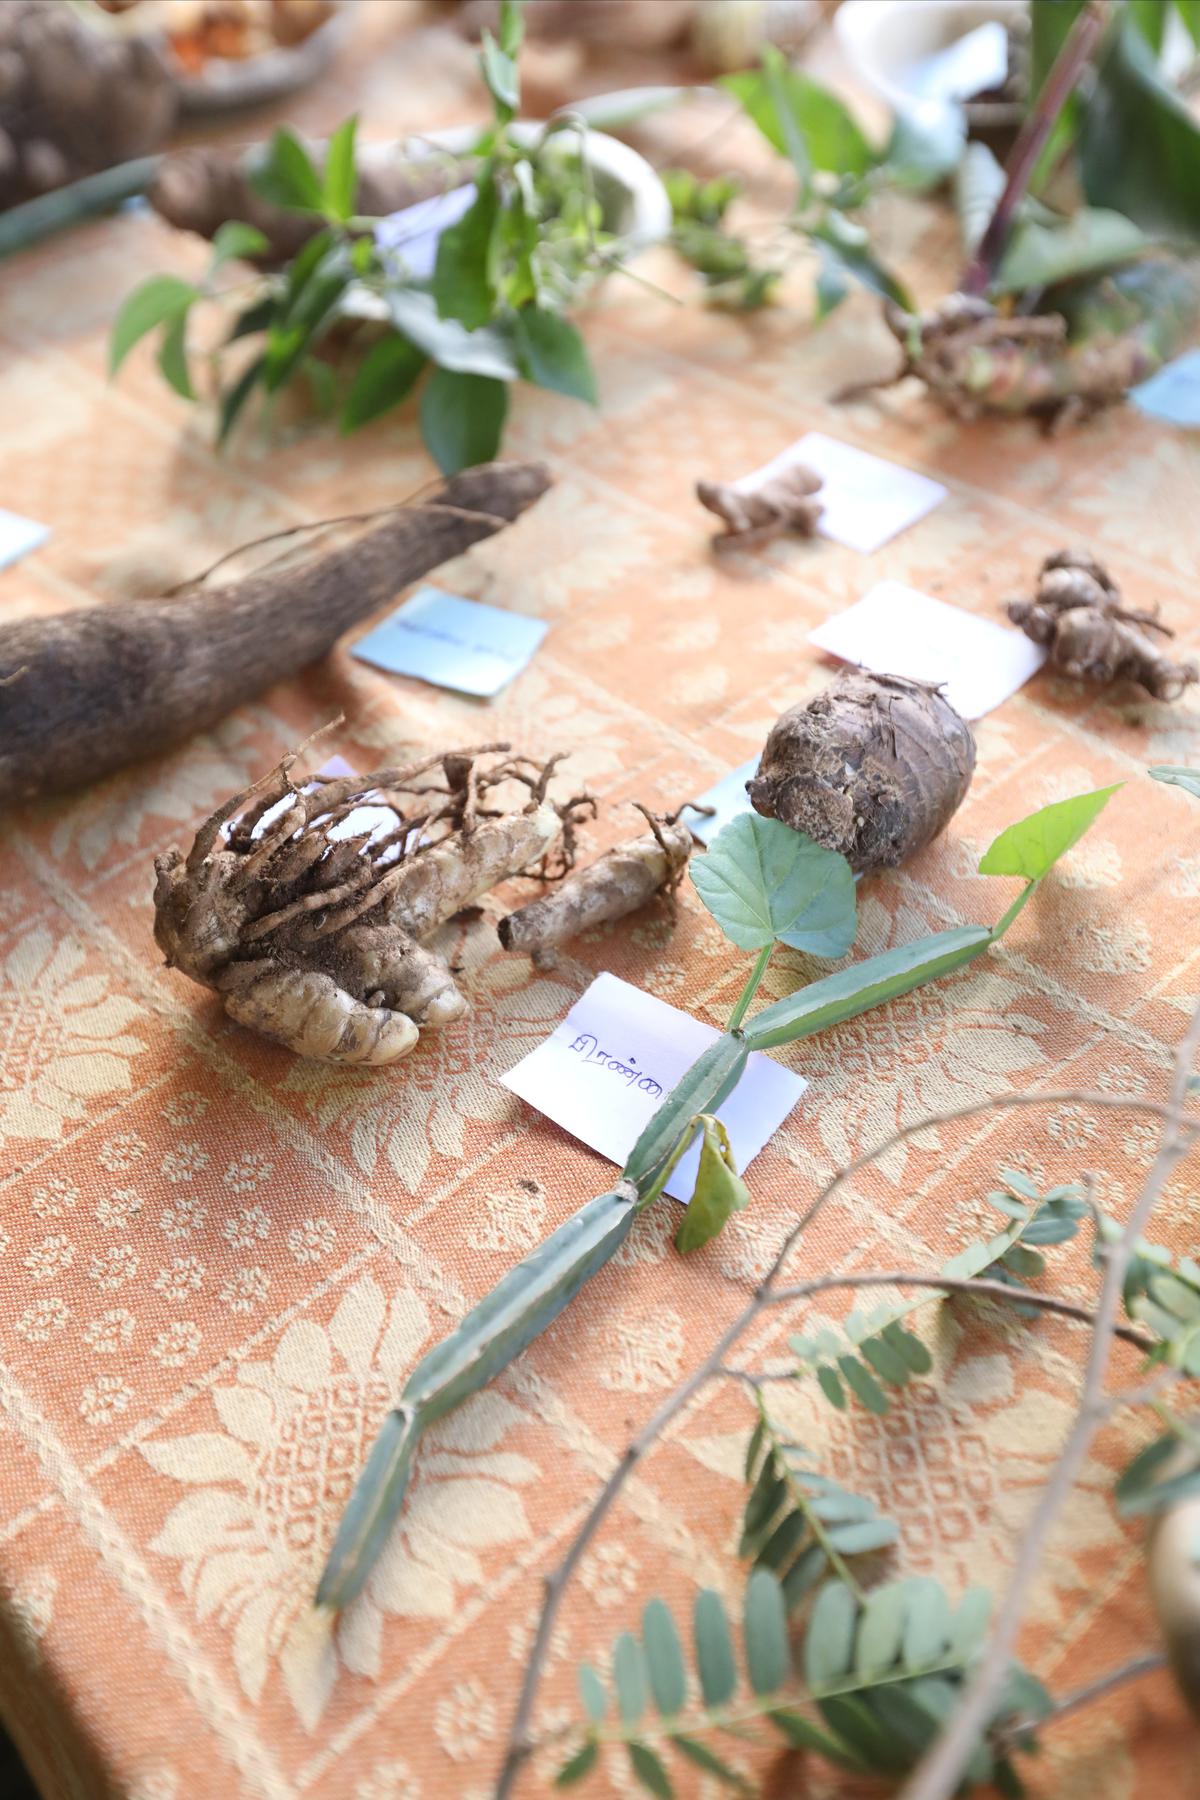 Wild foods on display at the previous festival